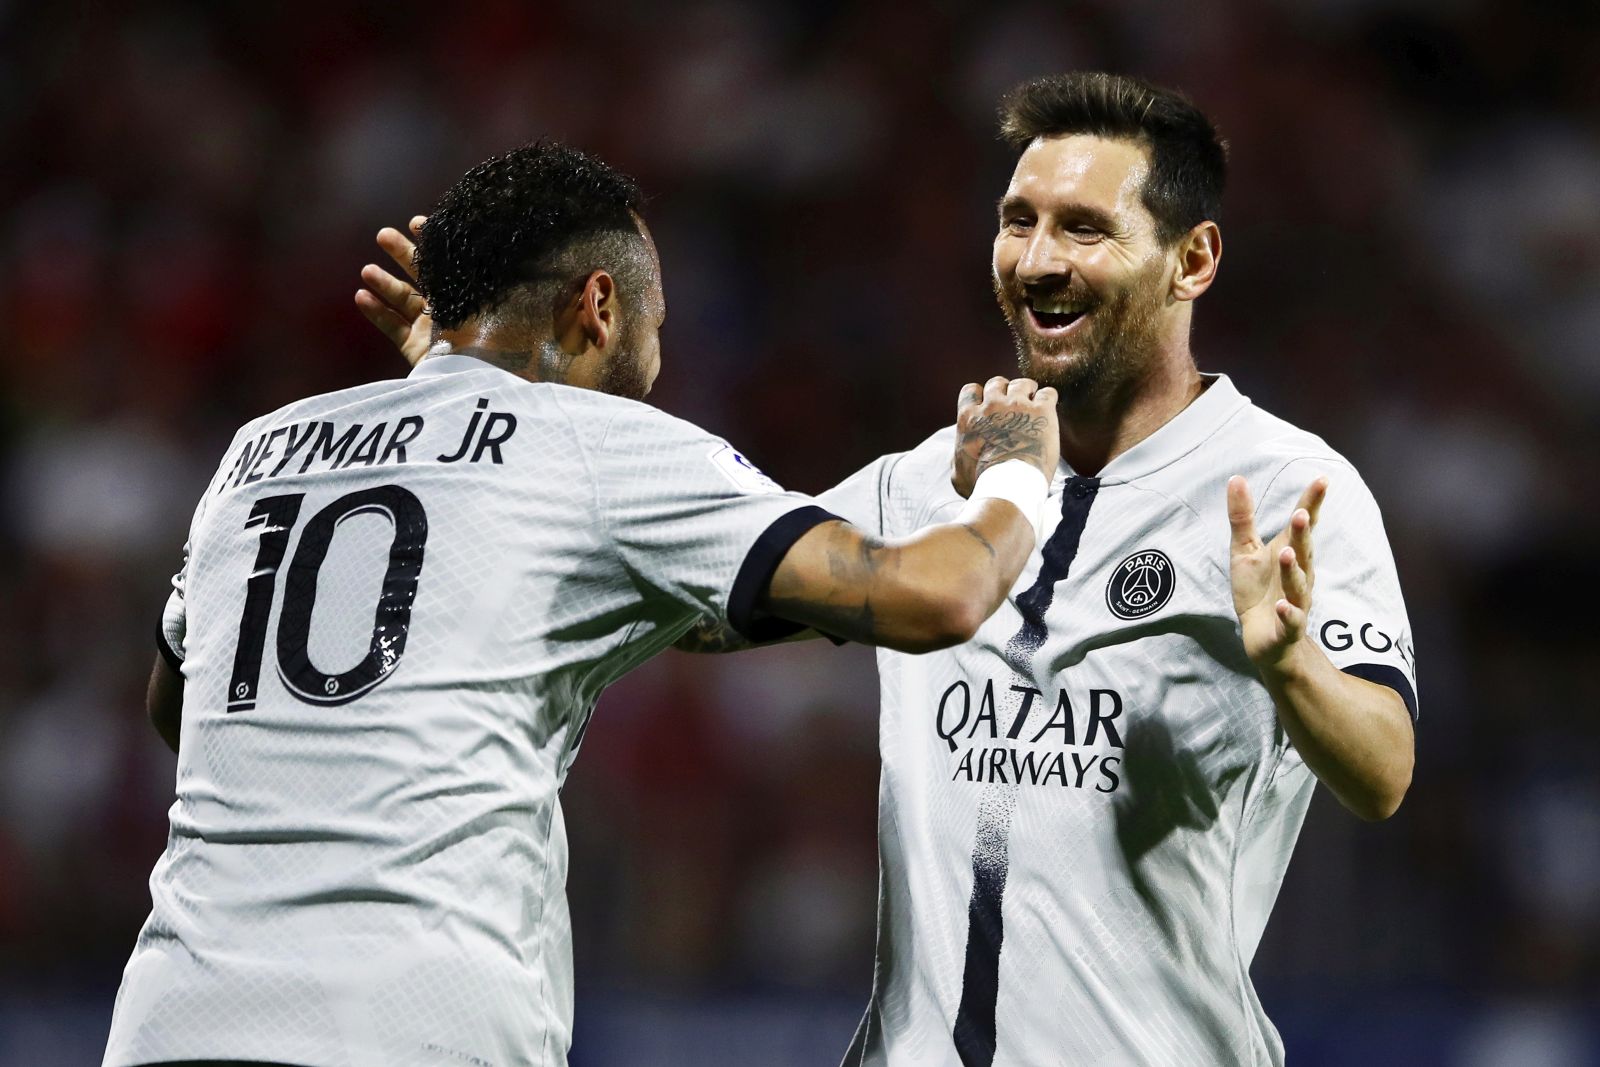 epa10109359 Paris Saint-Germain's Lionel Messi (R) celebrates with teammate Neymar (L) after scoring the 4-0 lead during the French Ligue 1 soccer match between Clermont Foot 63 and Paris Saint-Germain (PSG) in Clermont-Ferrand, France, 06 August 2022.  EPA/Mohammed Badra